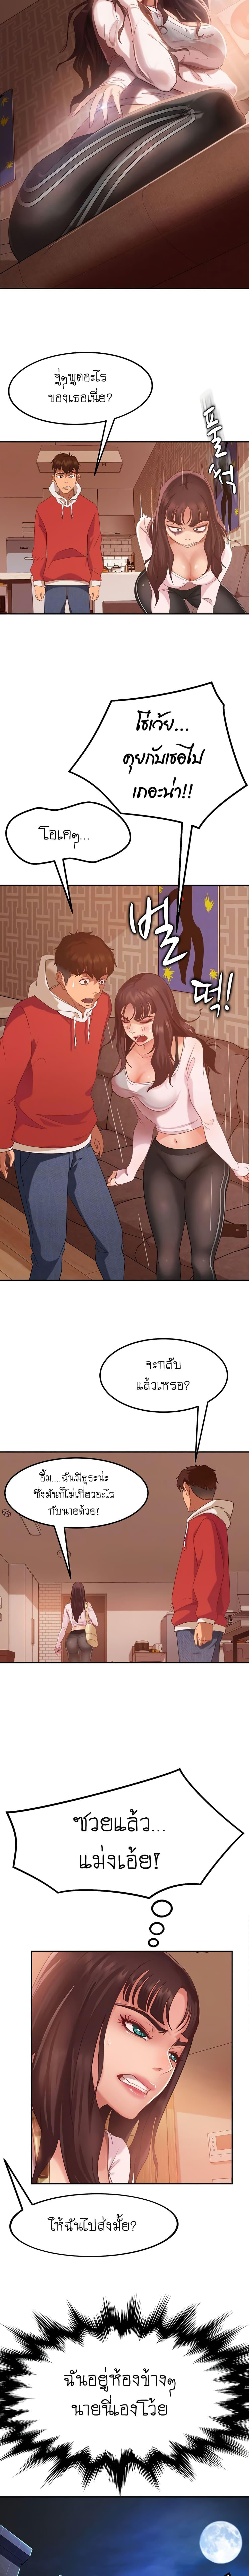 A Twisted Day 2 ภาพ 2